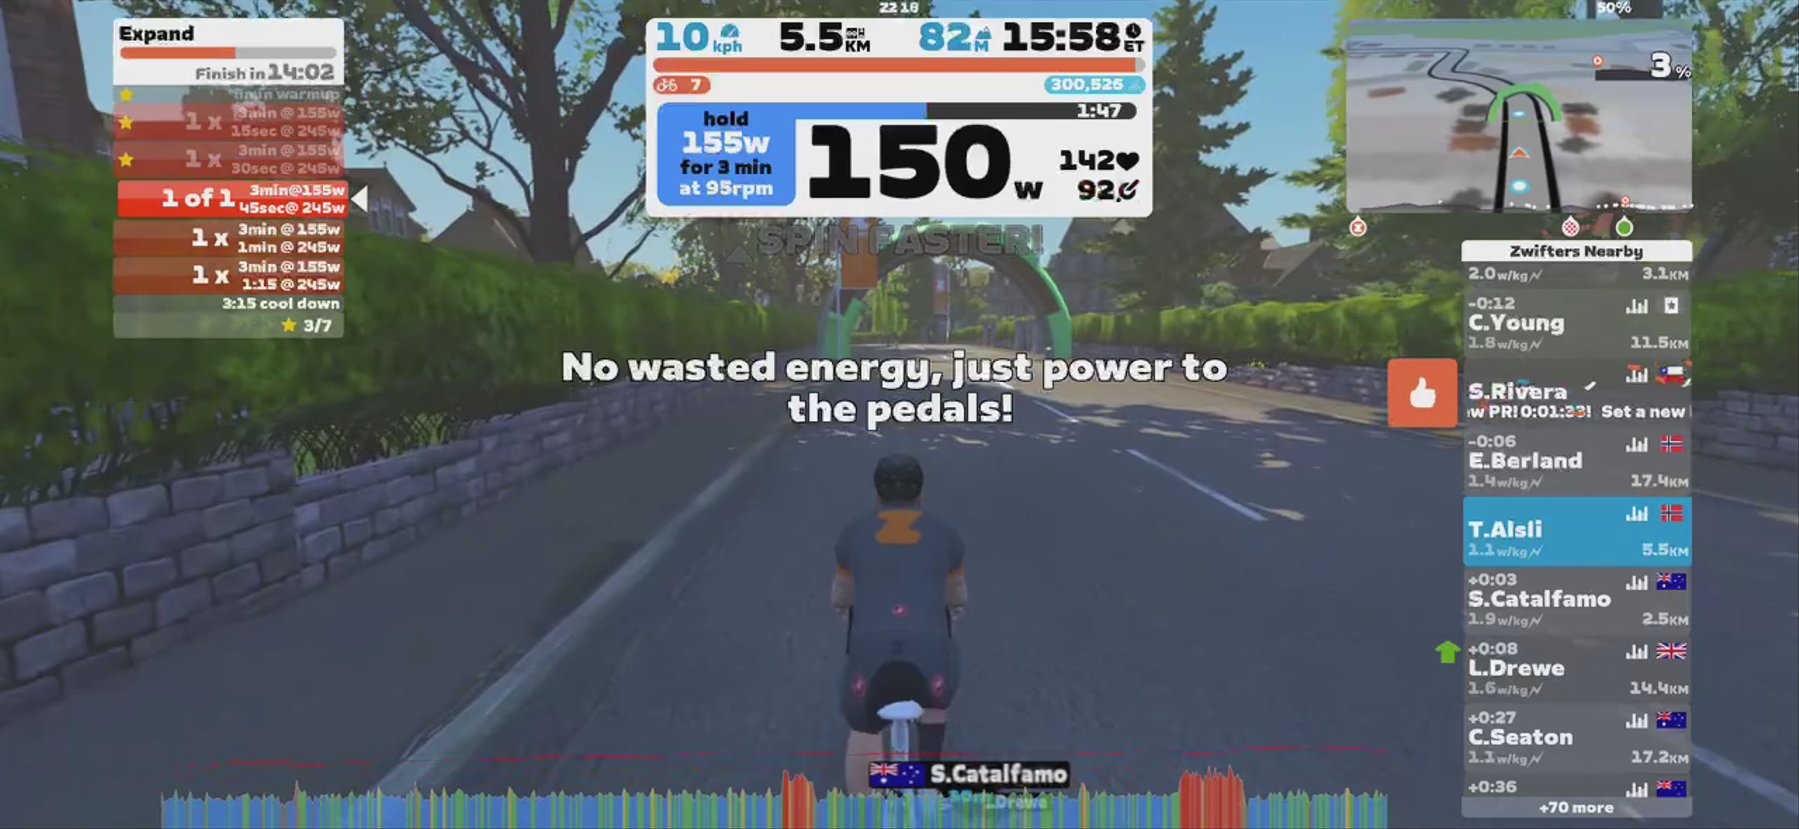 Zwift - Expand in Yorkshire